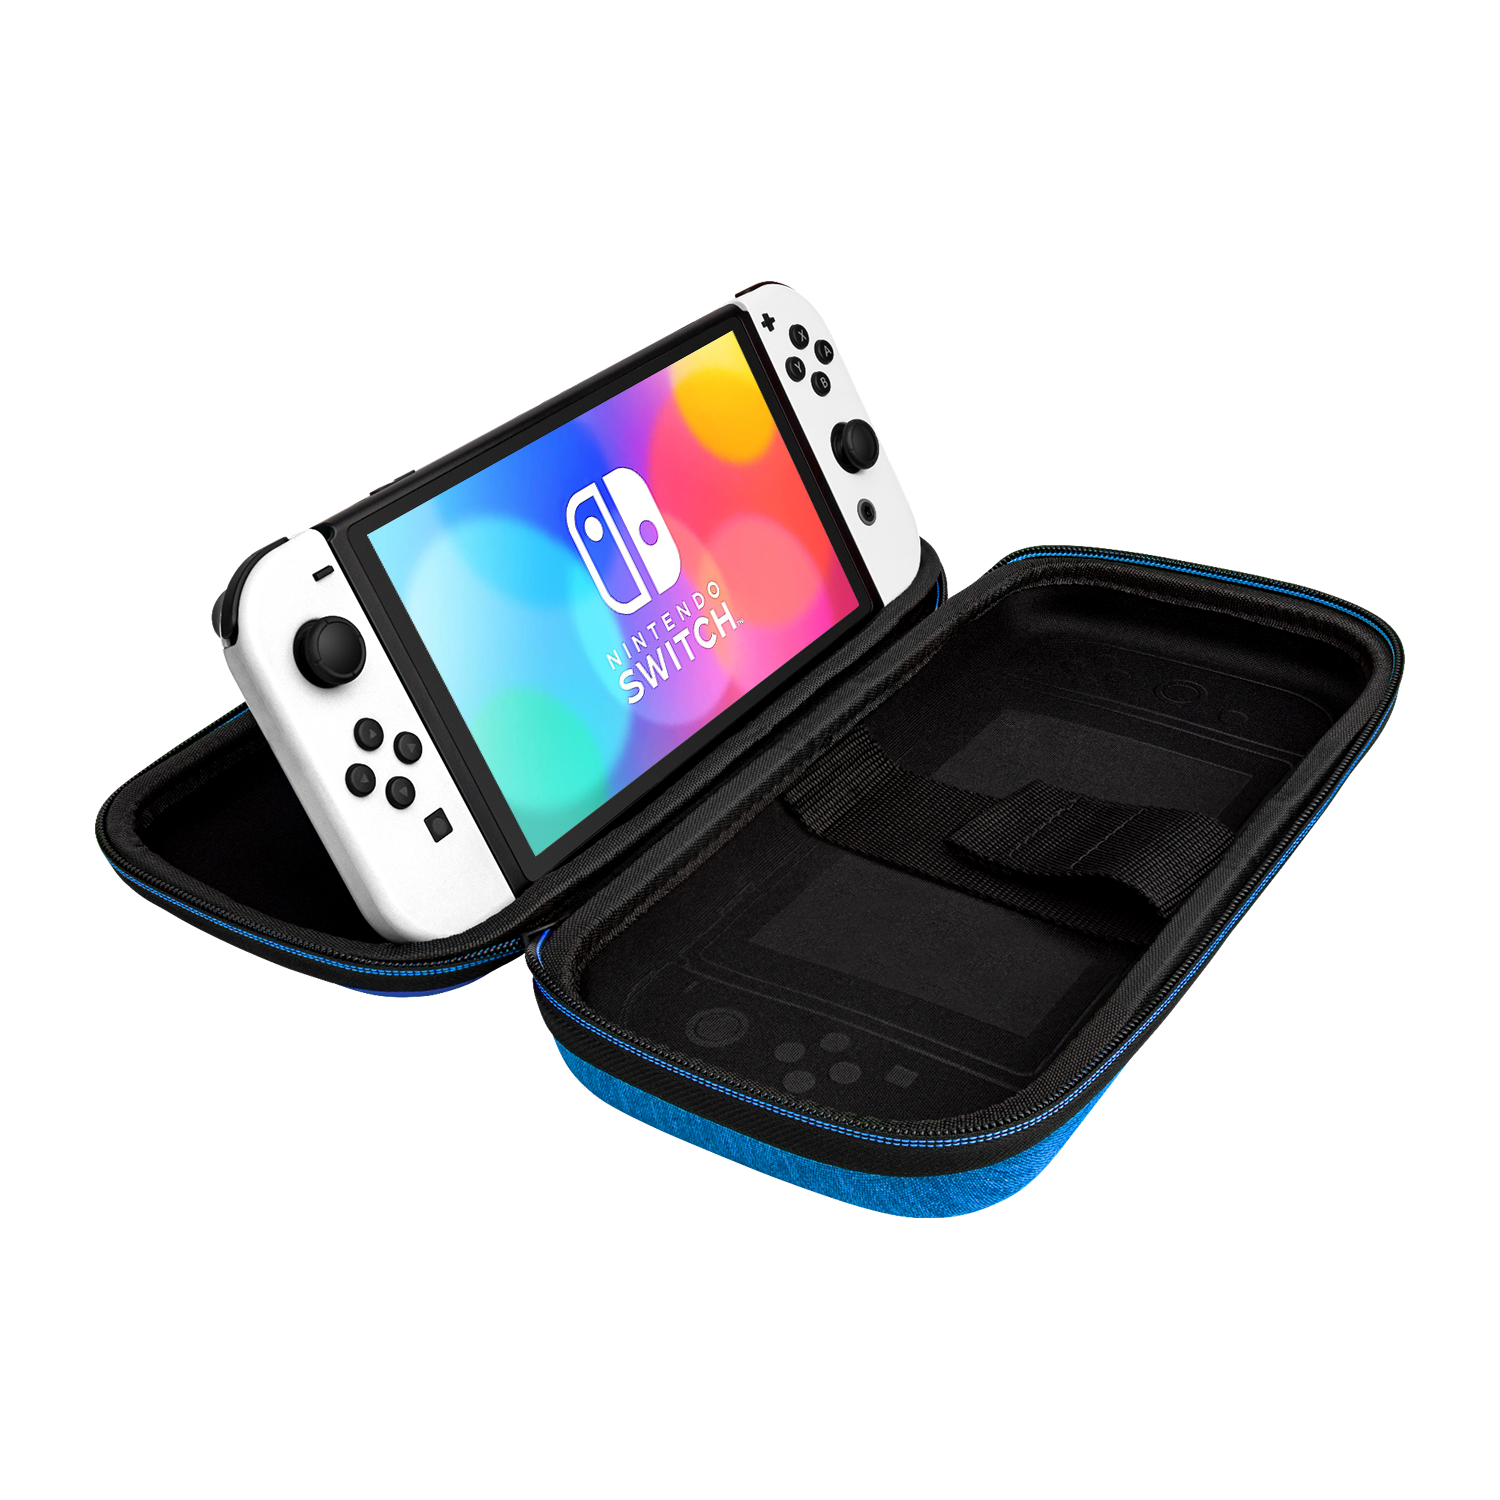 Nintendo Switch Travel Case Hyrule Blue by PDP